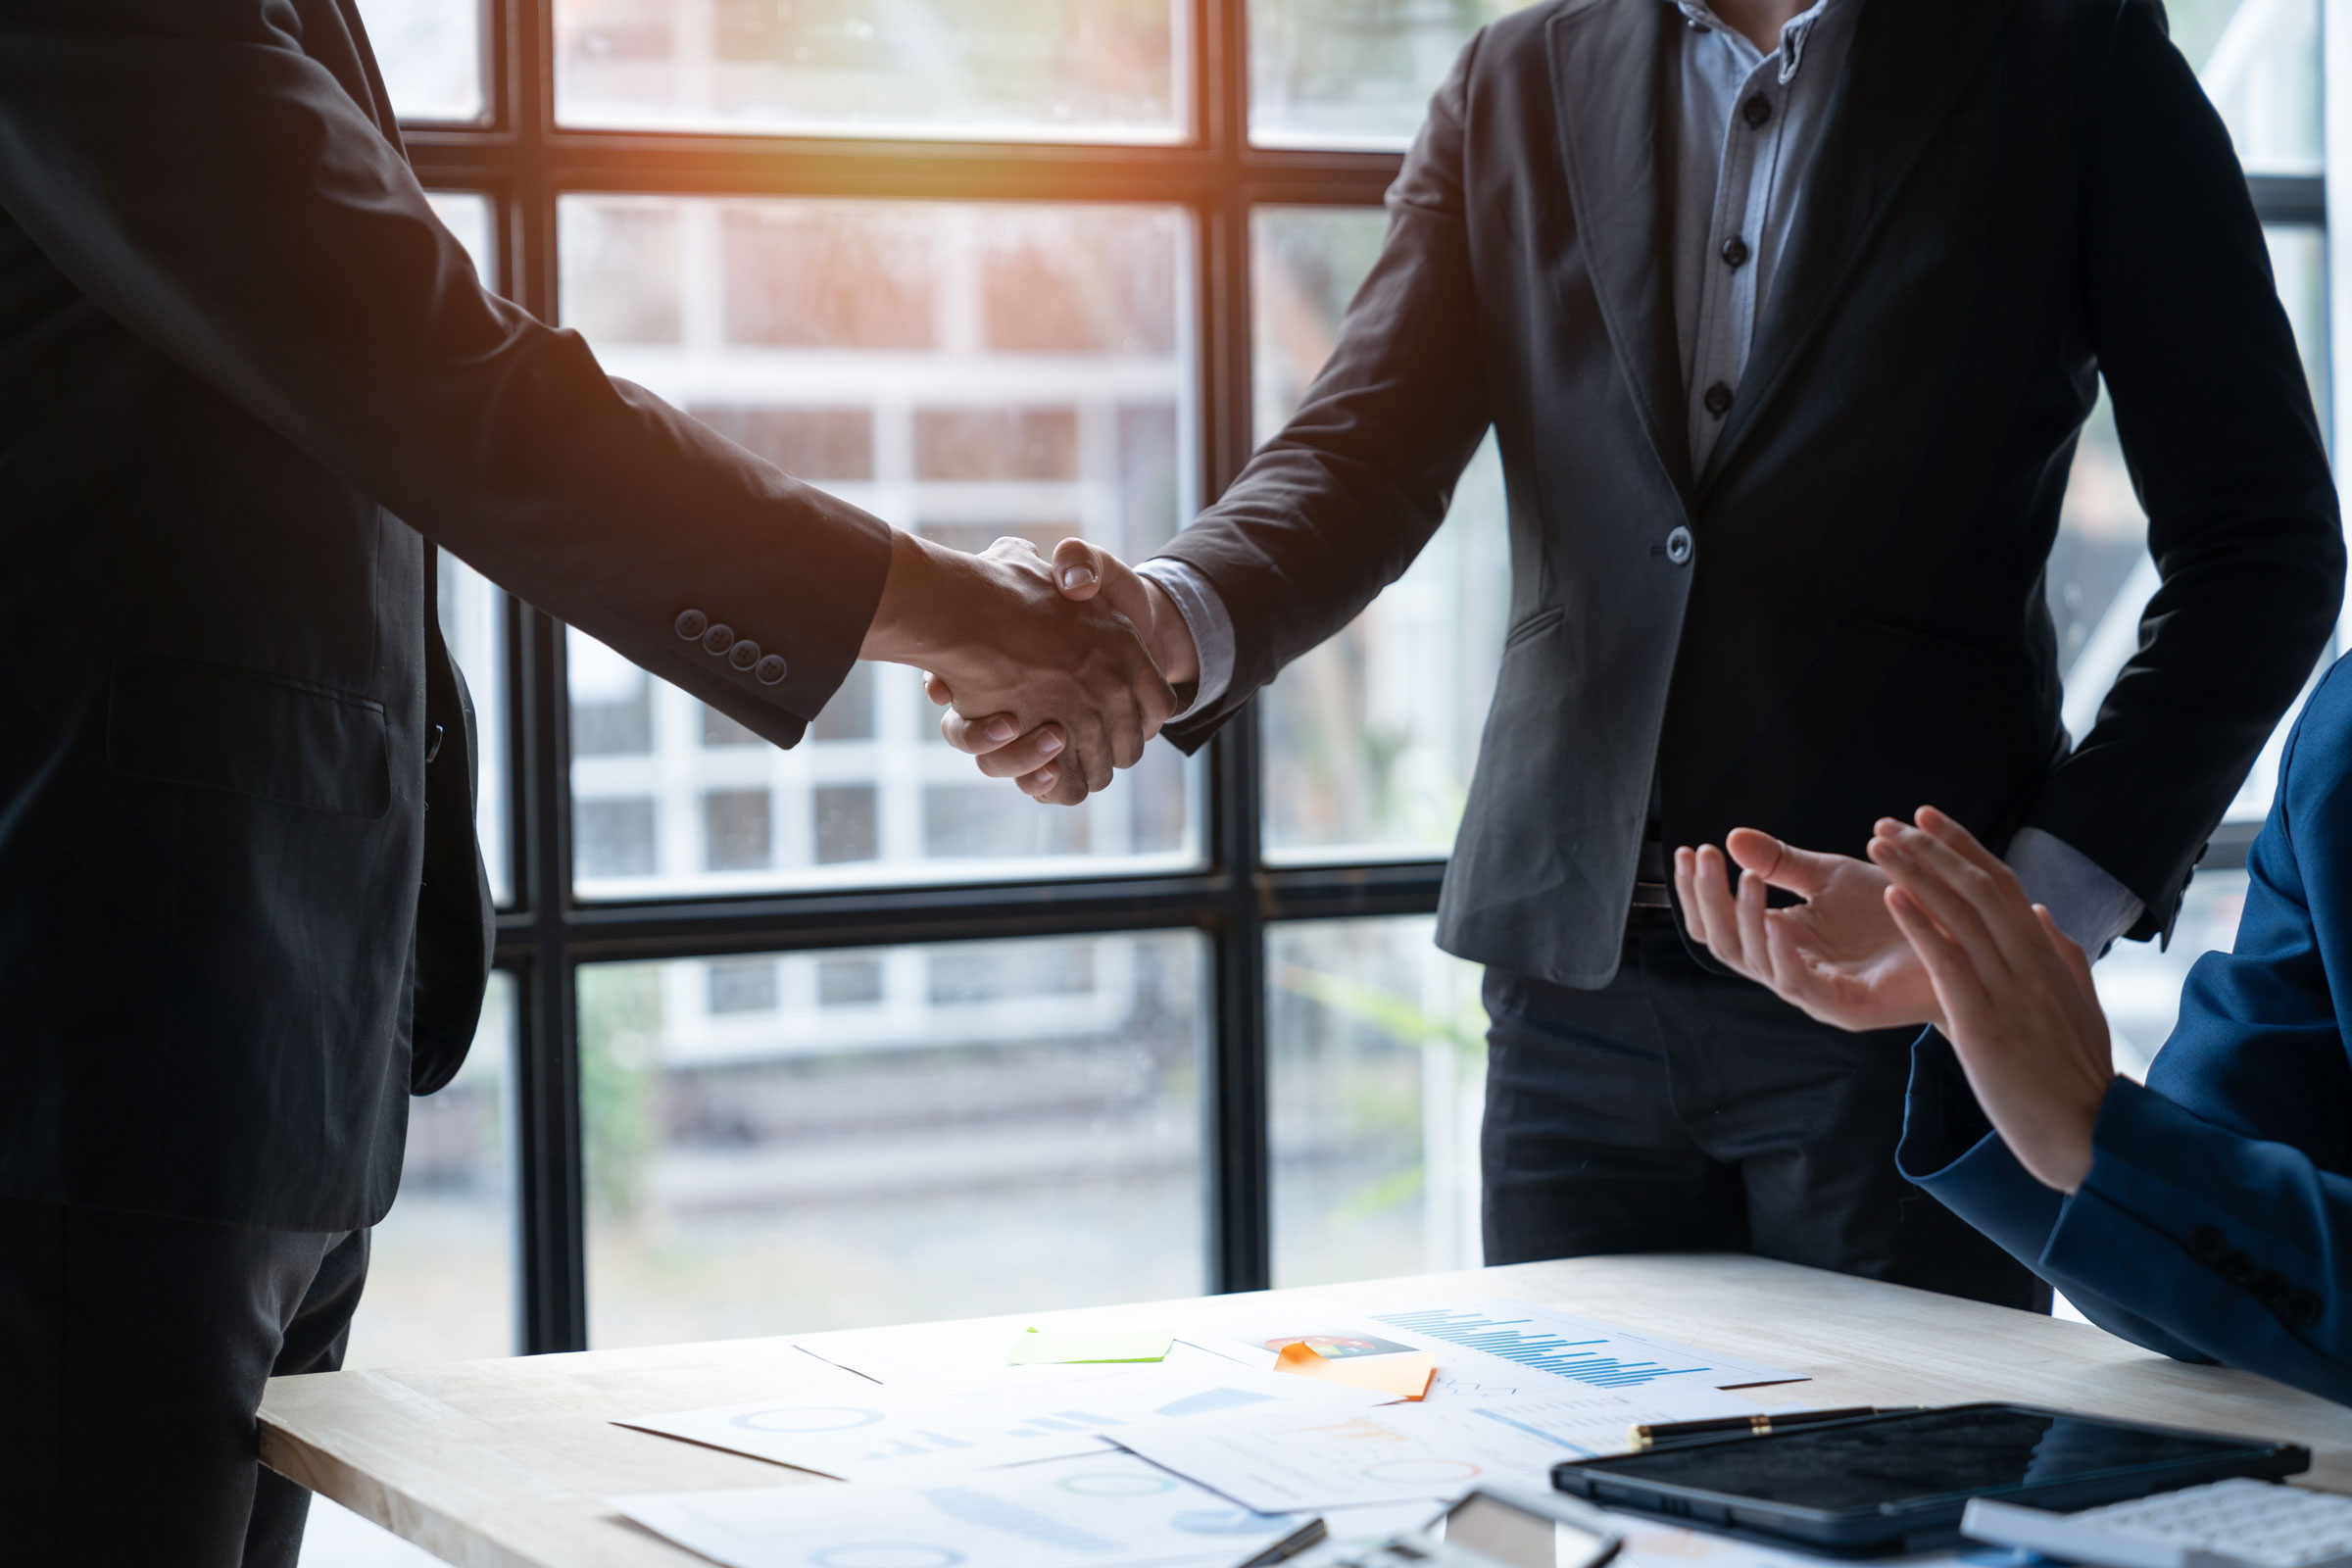 What are the differences between partnership agreements and joint ventures?